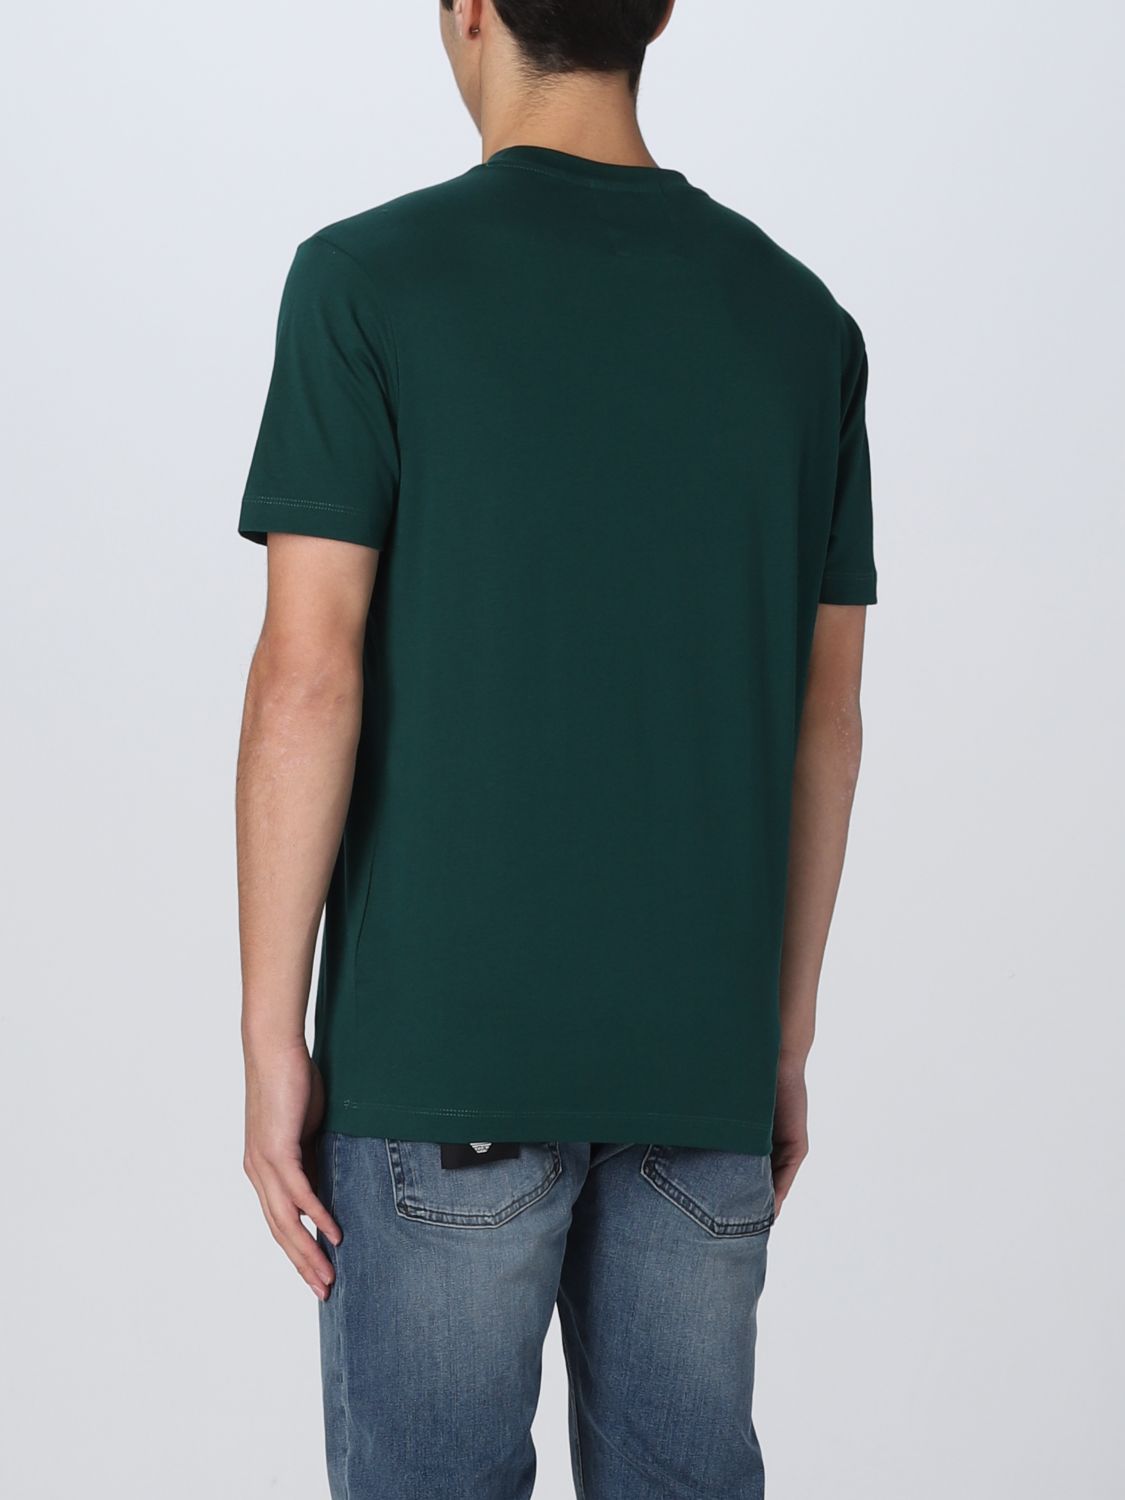 EMPORIO ARMANI: t-shirt for man - Forest Green | Emporio Armani t-shirt  8N1TN51JPZZ online on 